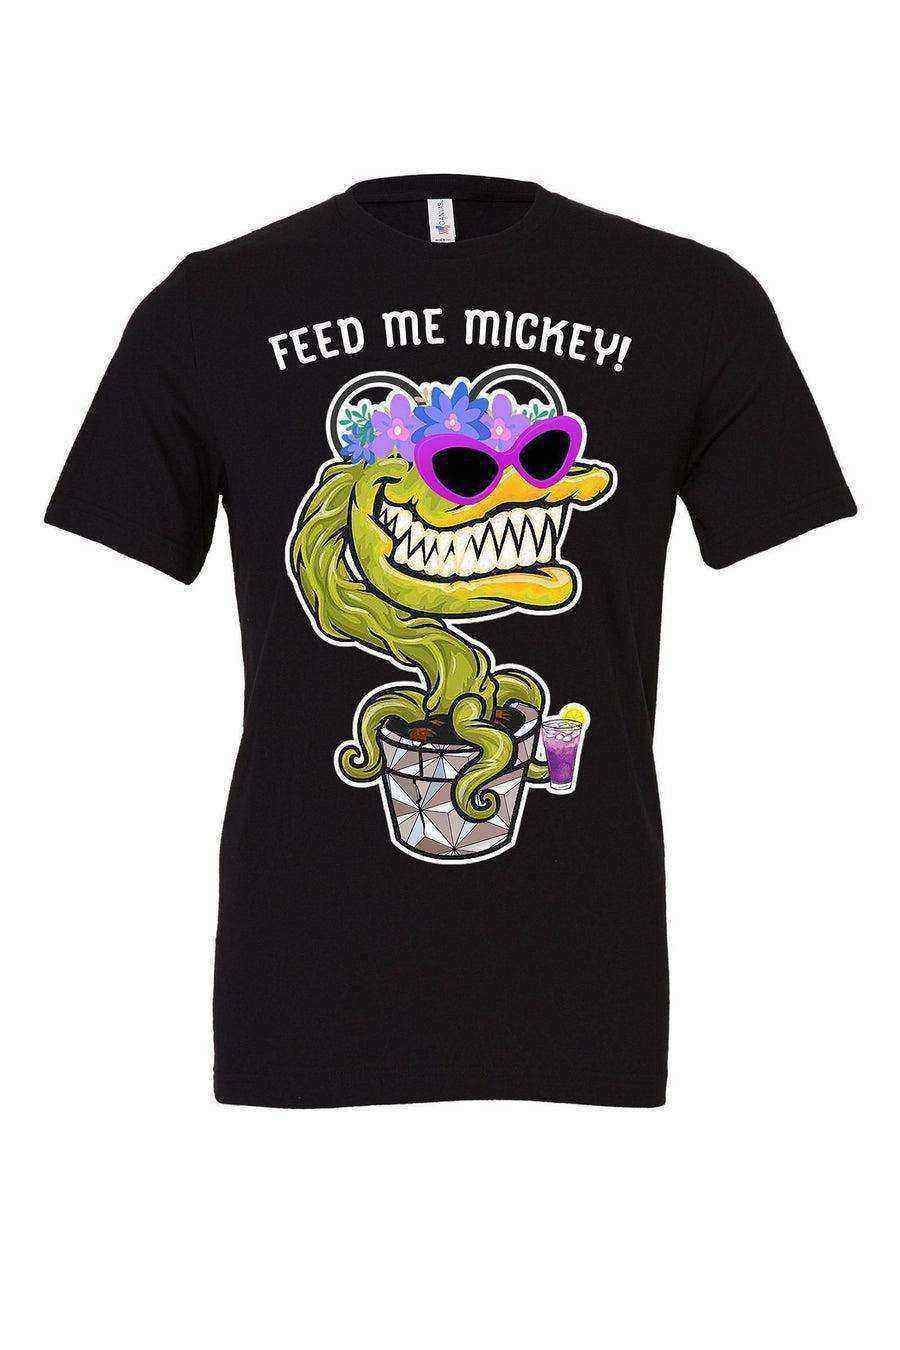 Toddler | Feed Me Mickey Shirt | Little Shop Of Horrors Shirt - Dylan's Tees